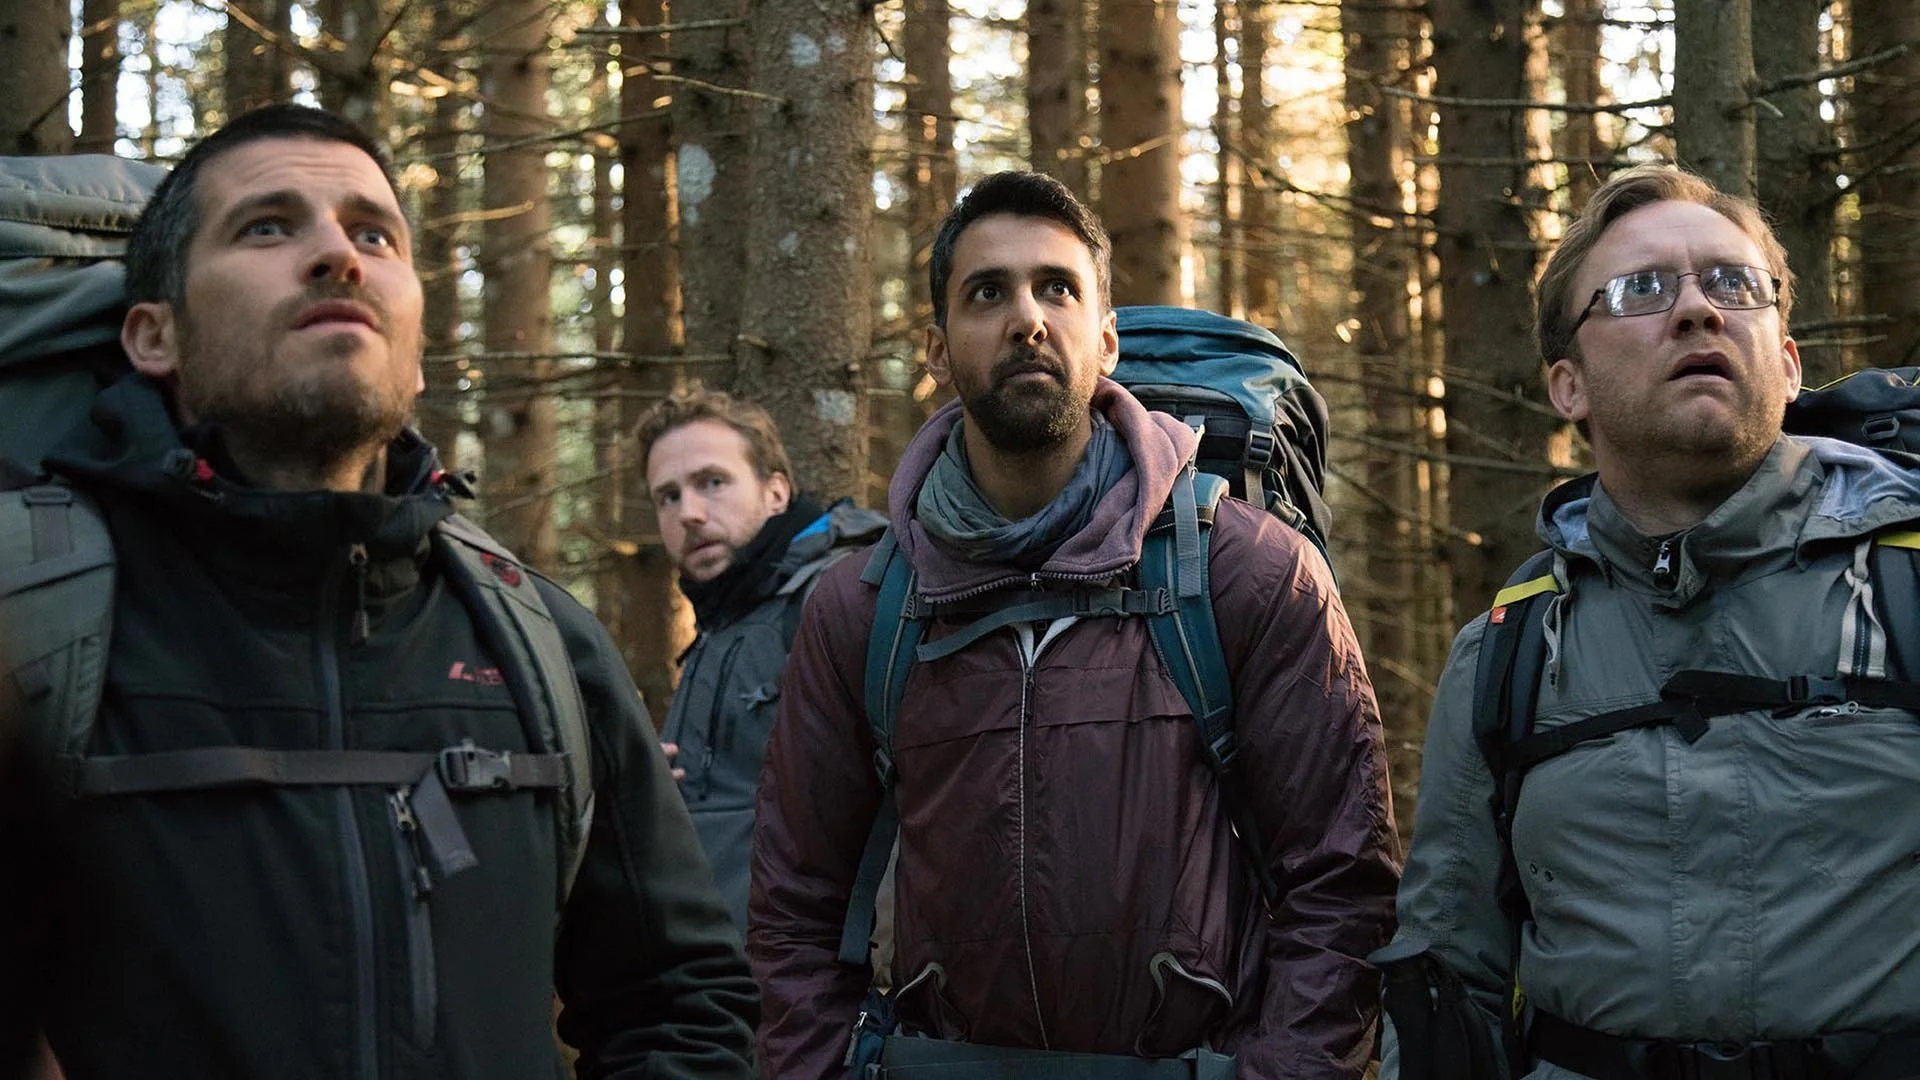 Best horror movies on netflix: The Ritual